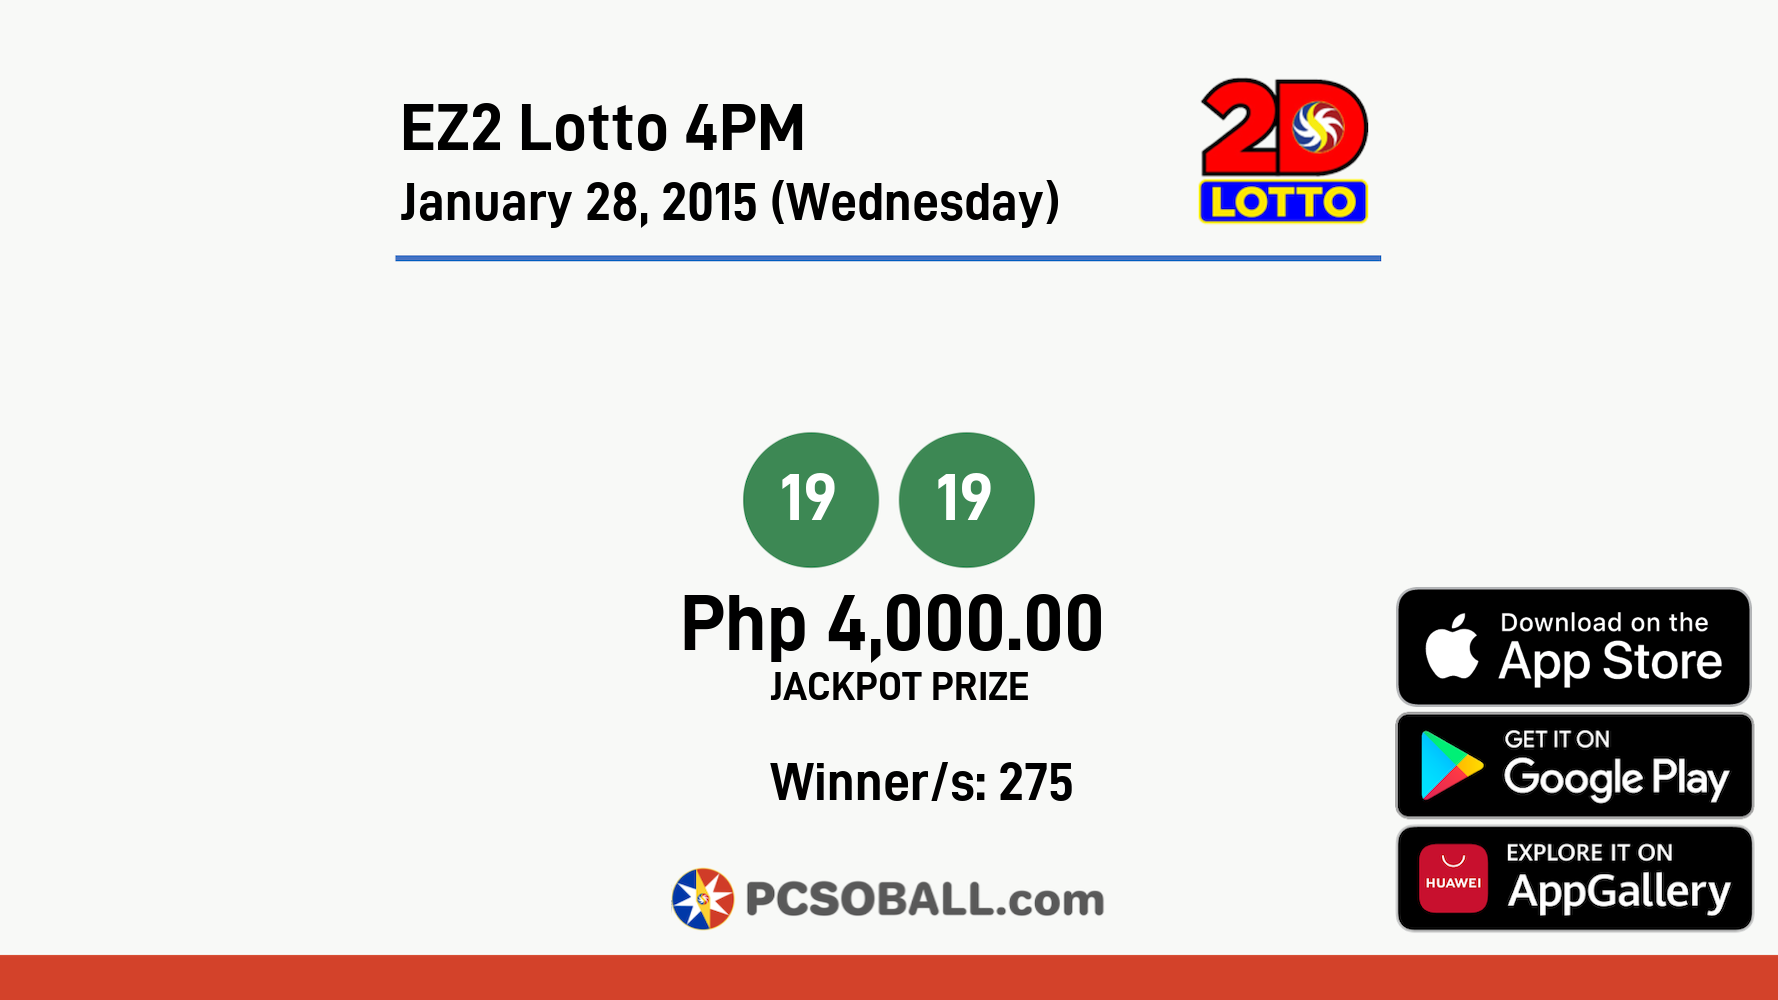 EZ2 Lotto 4PM January 28, 2015 (Wednesday) Result